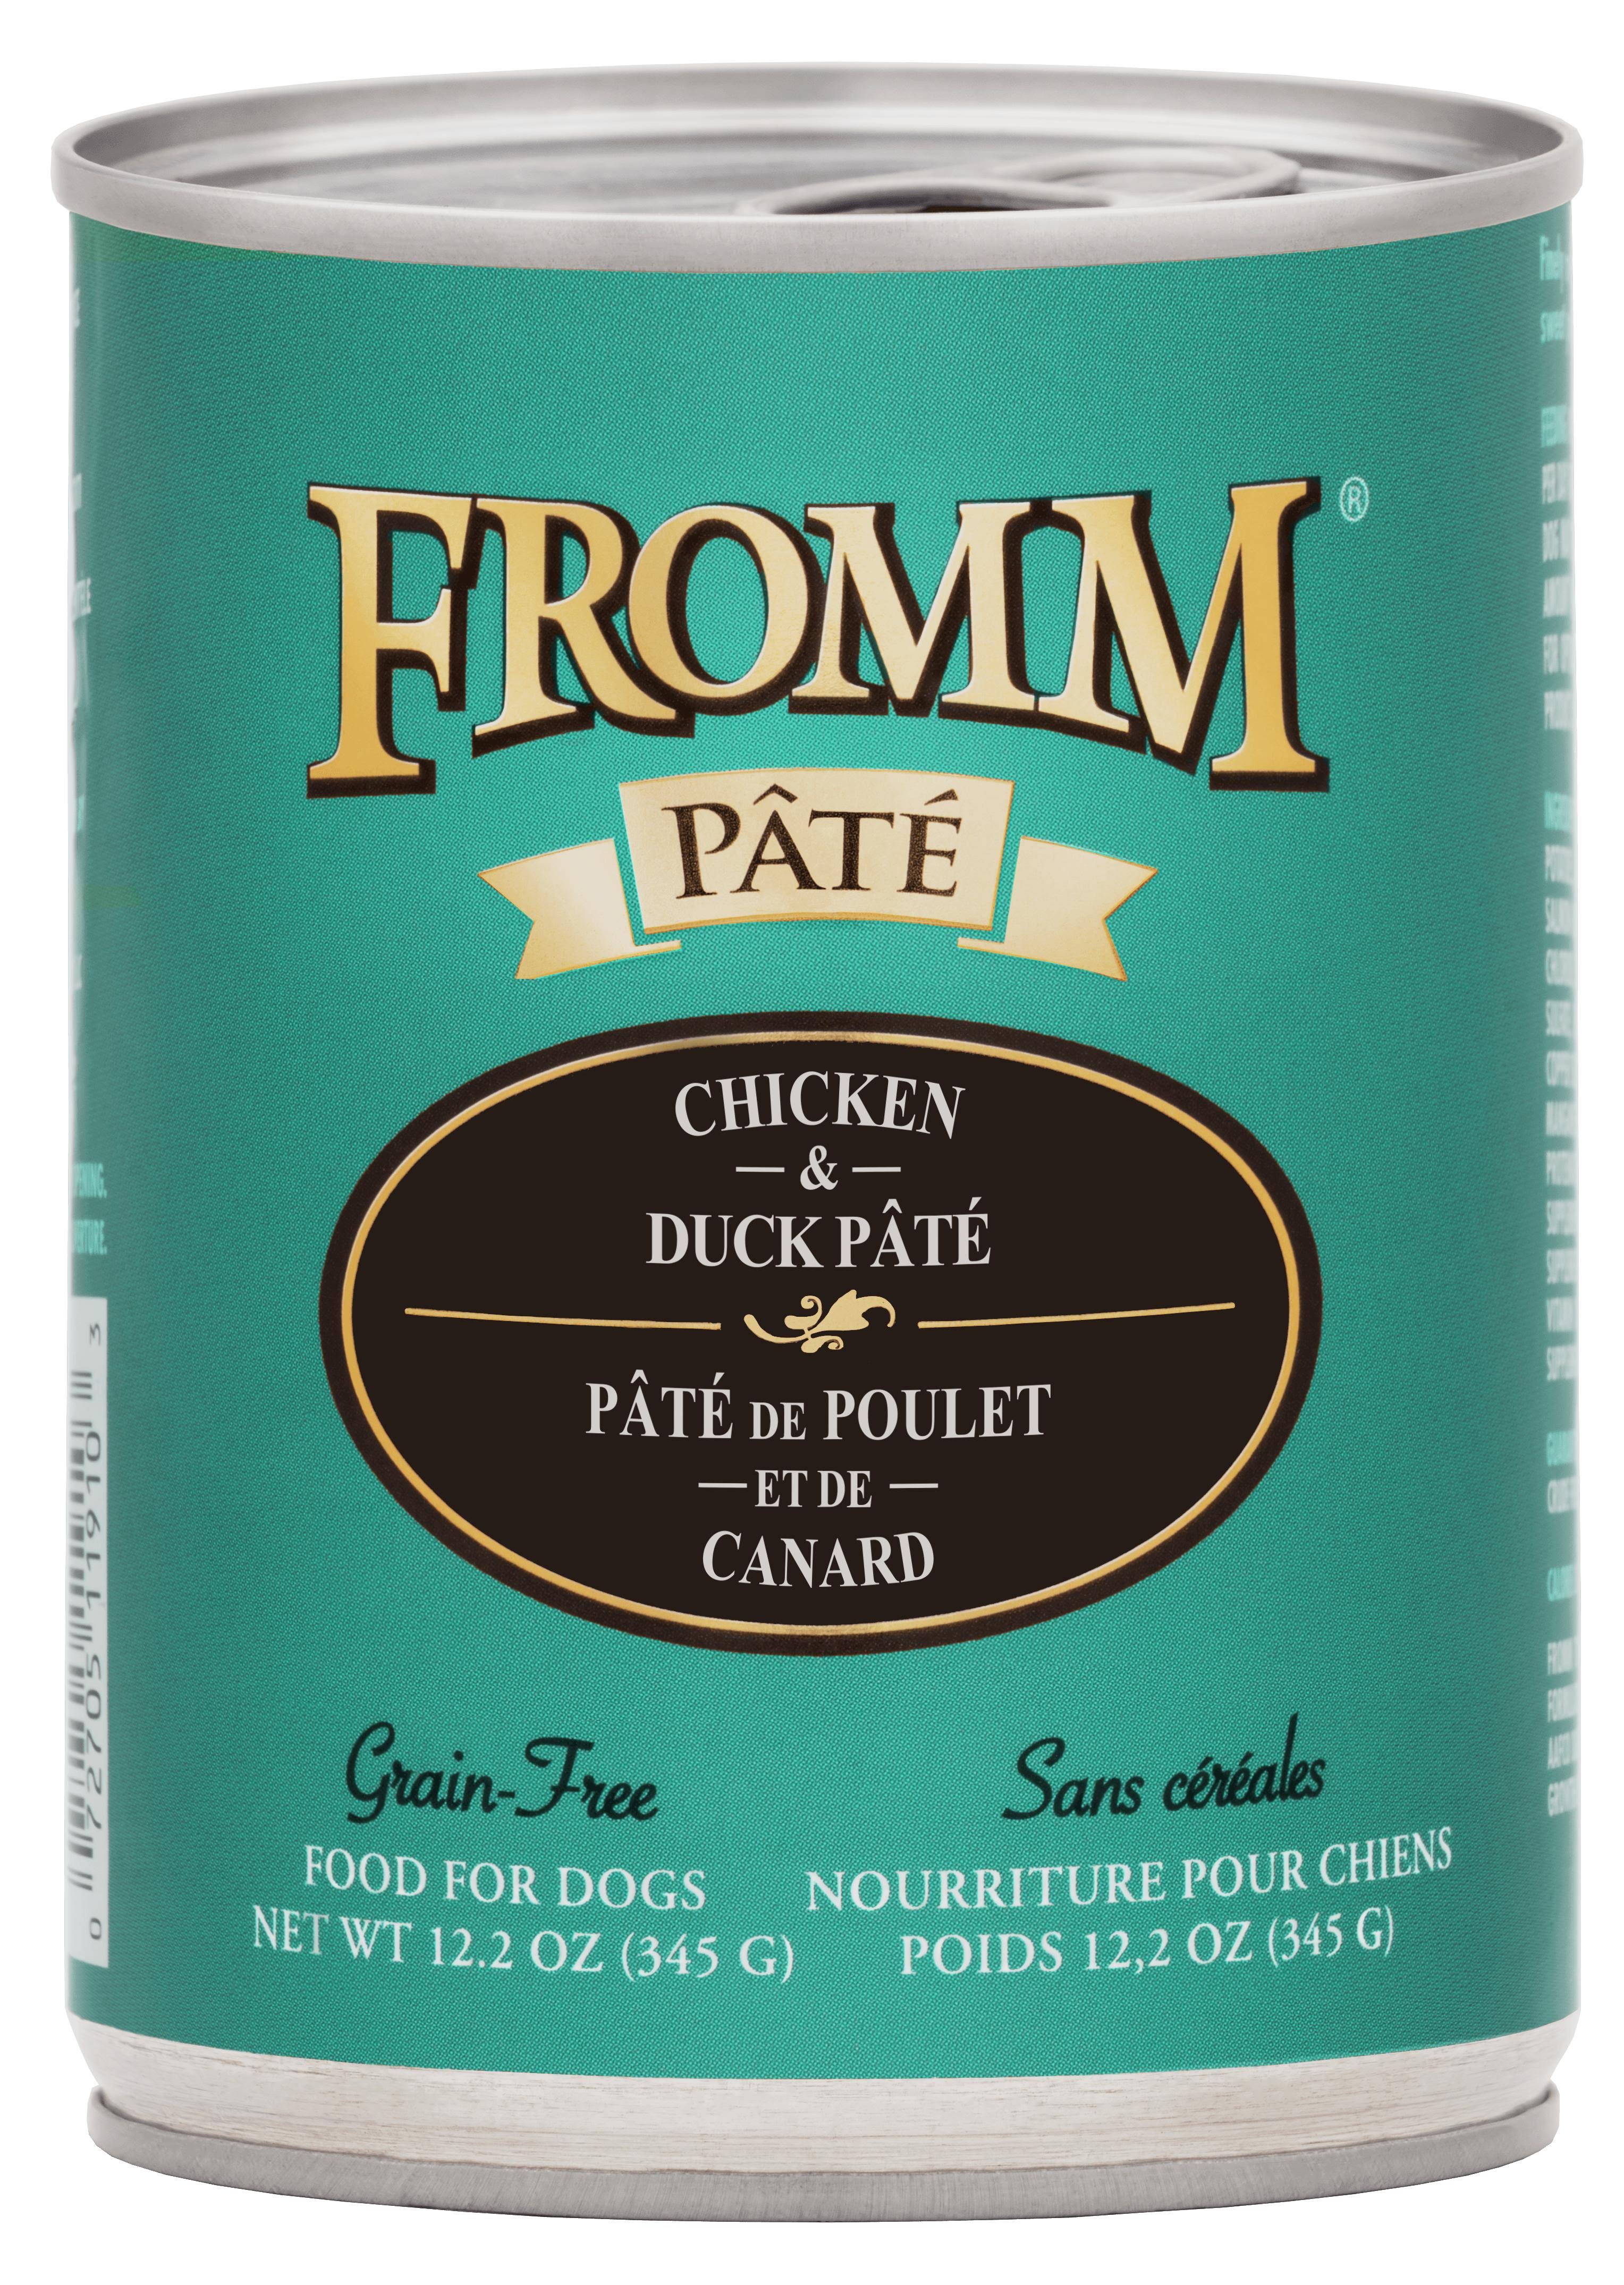 Fromm - Canned Dog Food Chicken & Duck Pate 12.2oz